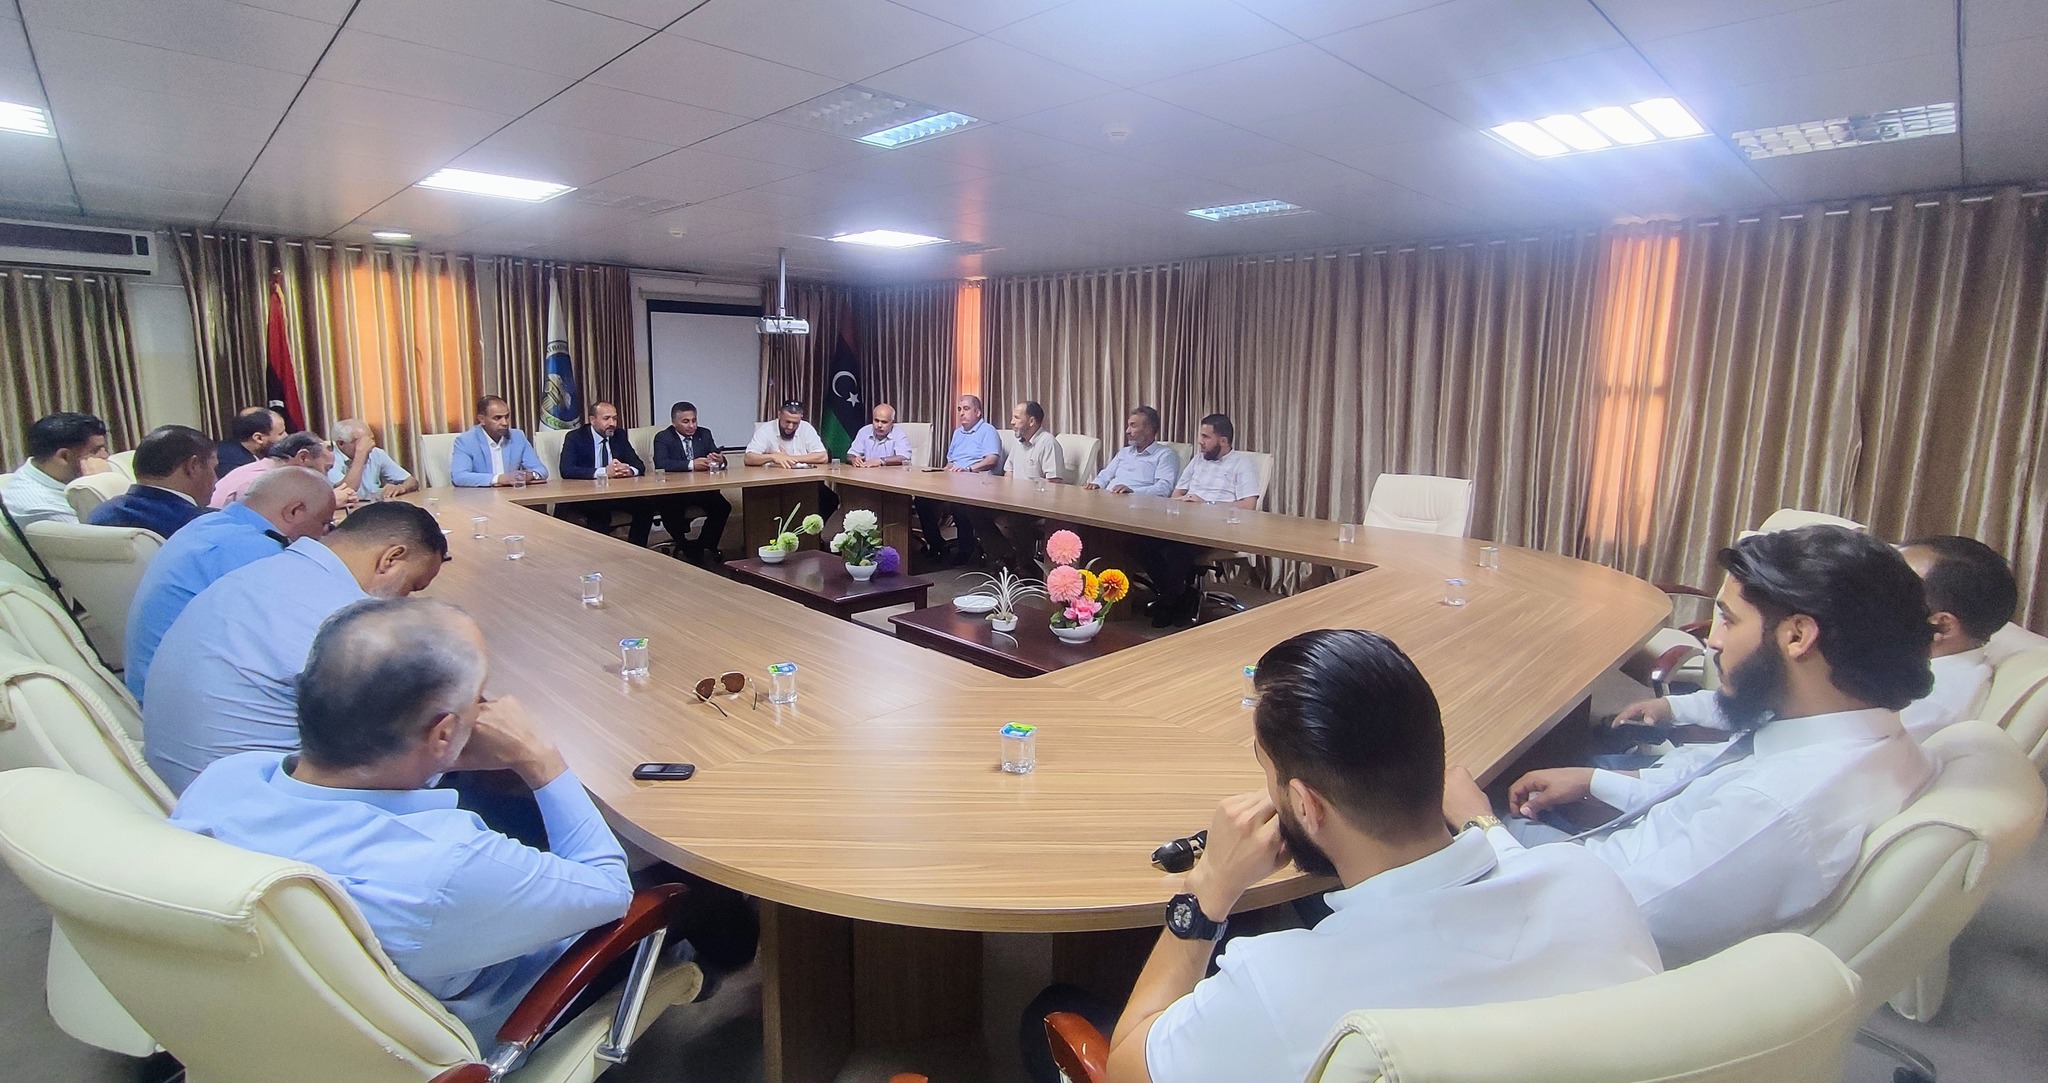 A joint meeting between Sabratha University and the Office of the National Anti-Corruption Authority in the Ghar region
